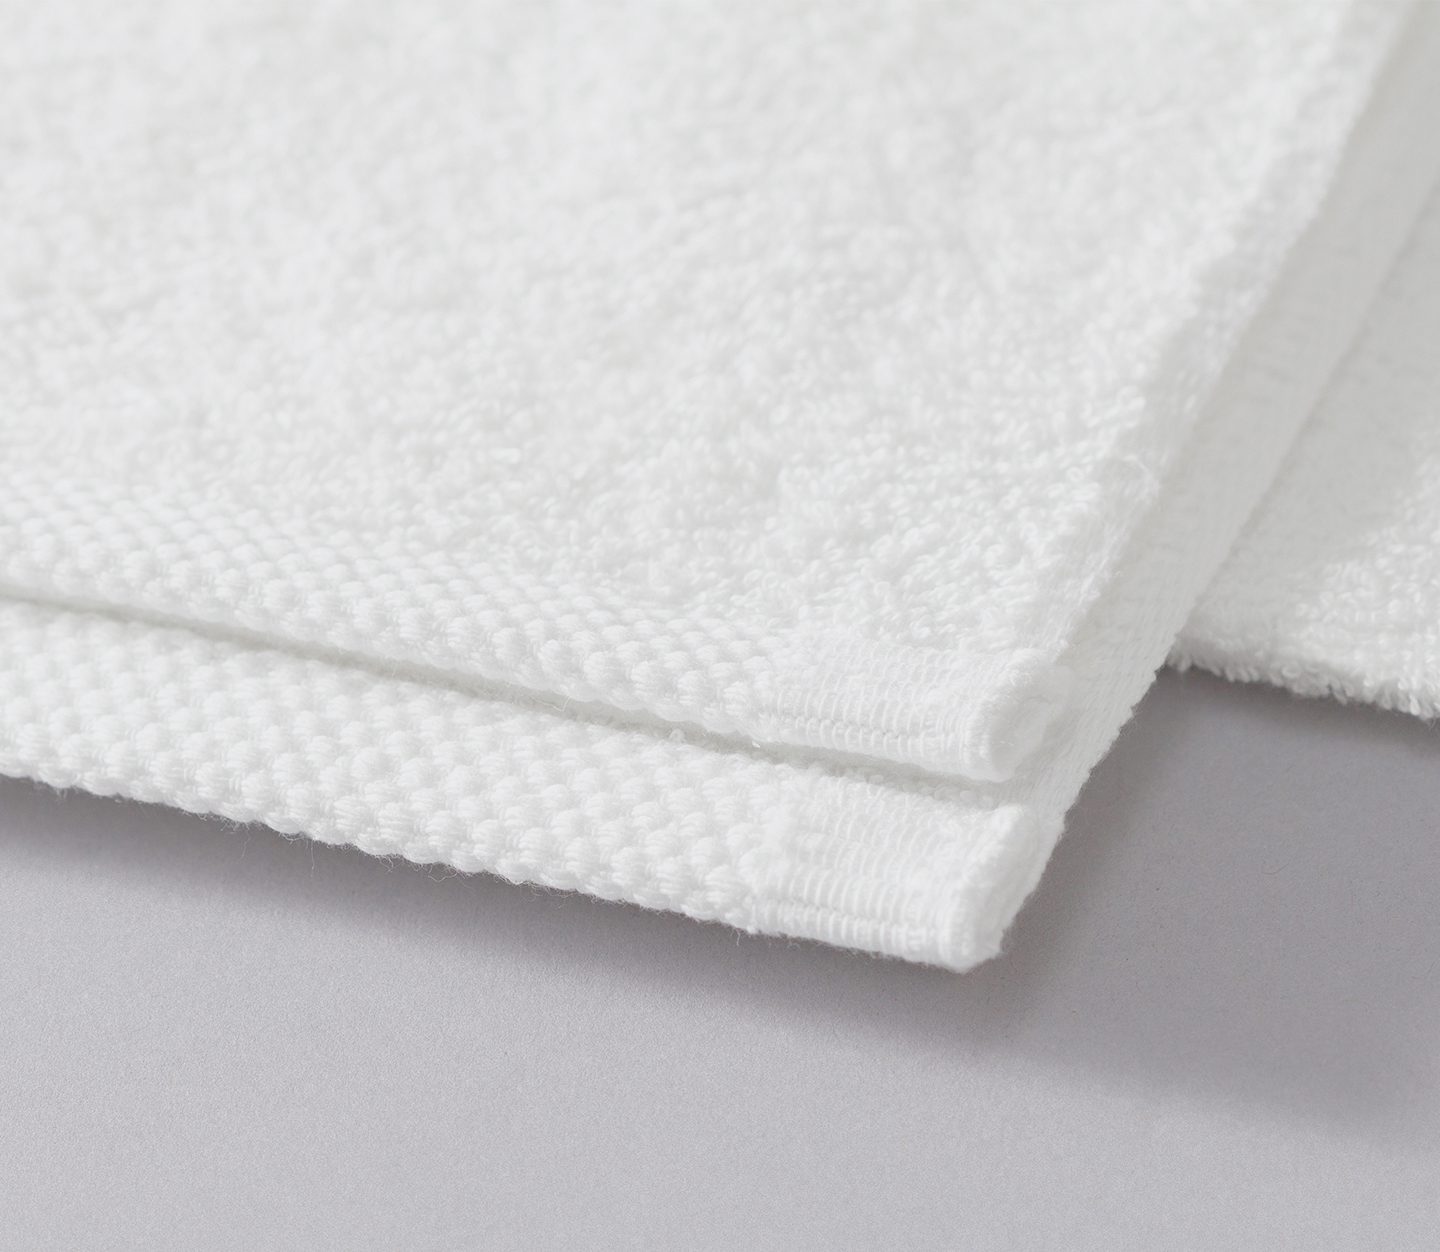 Wild About White Towels? LivingT has you covered with thick, soft,  absorbent, swoon-worthy hotel quality towels available for delivery…